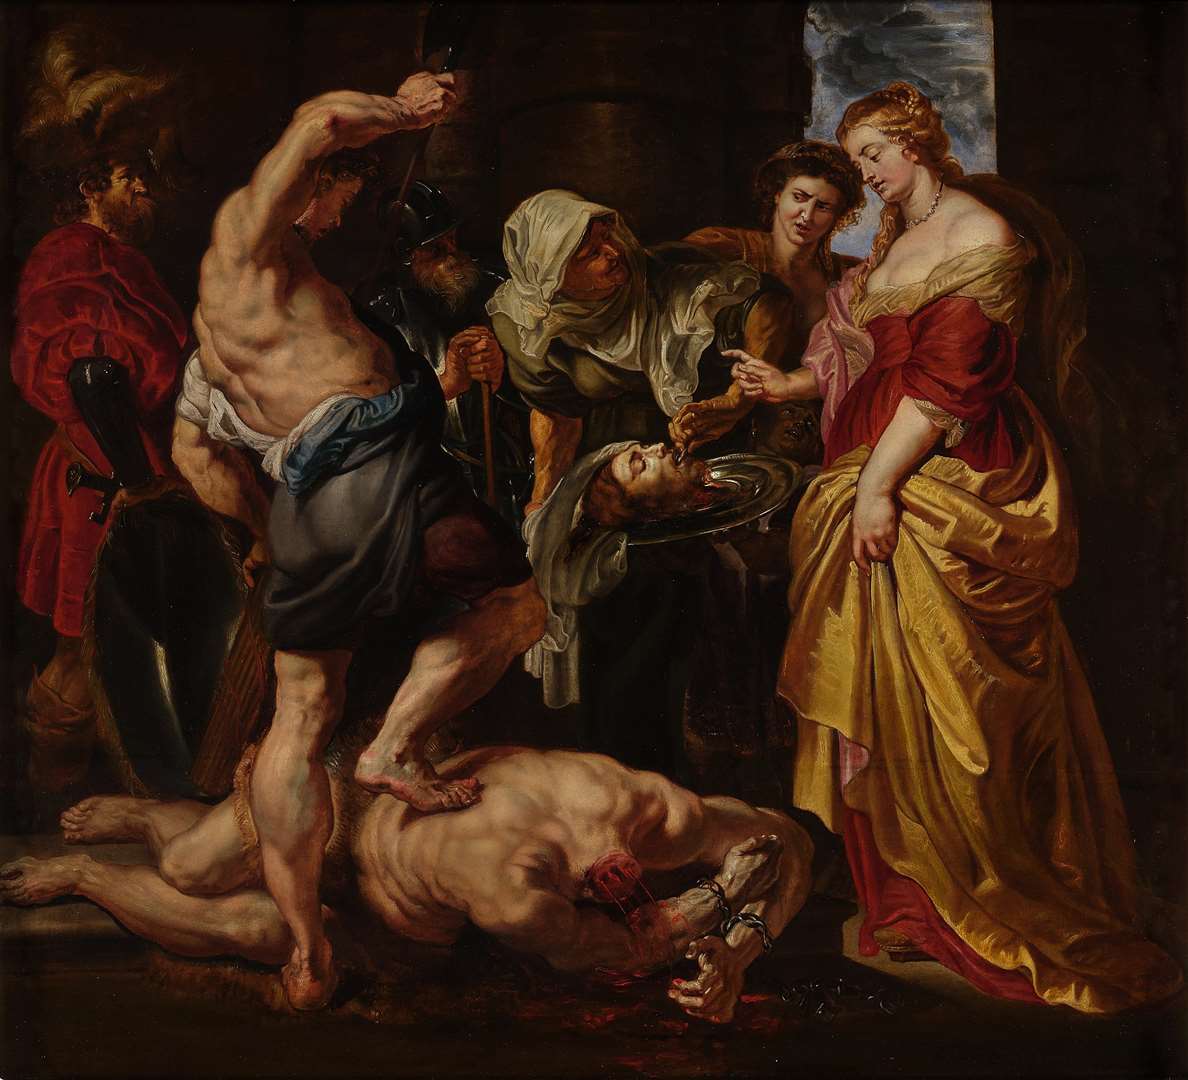 Sir Peter Paul Rubens’ Salome Presented With The Severed Head Of Saint John The Baptist (Sothebys/PA)